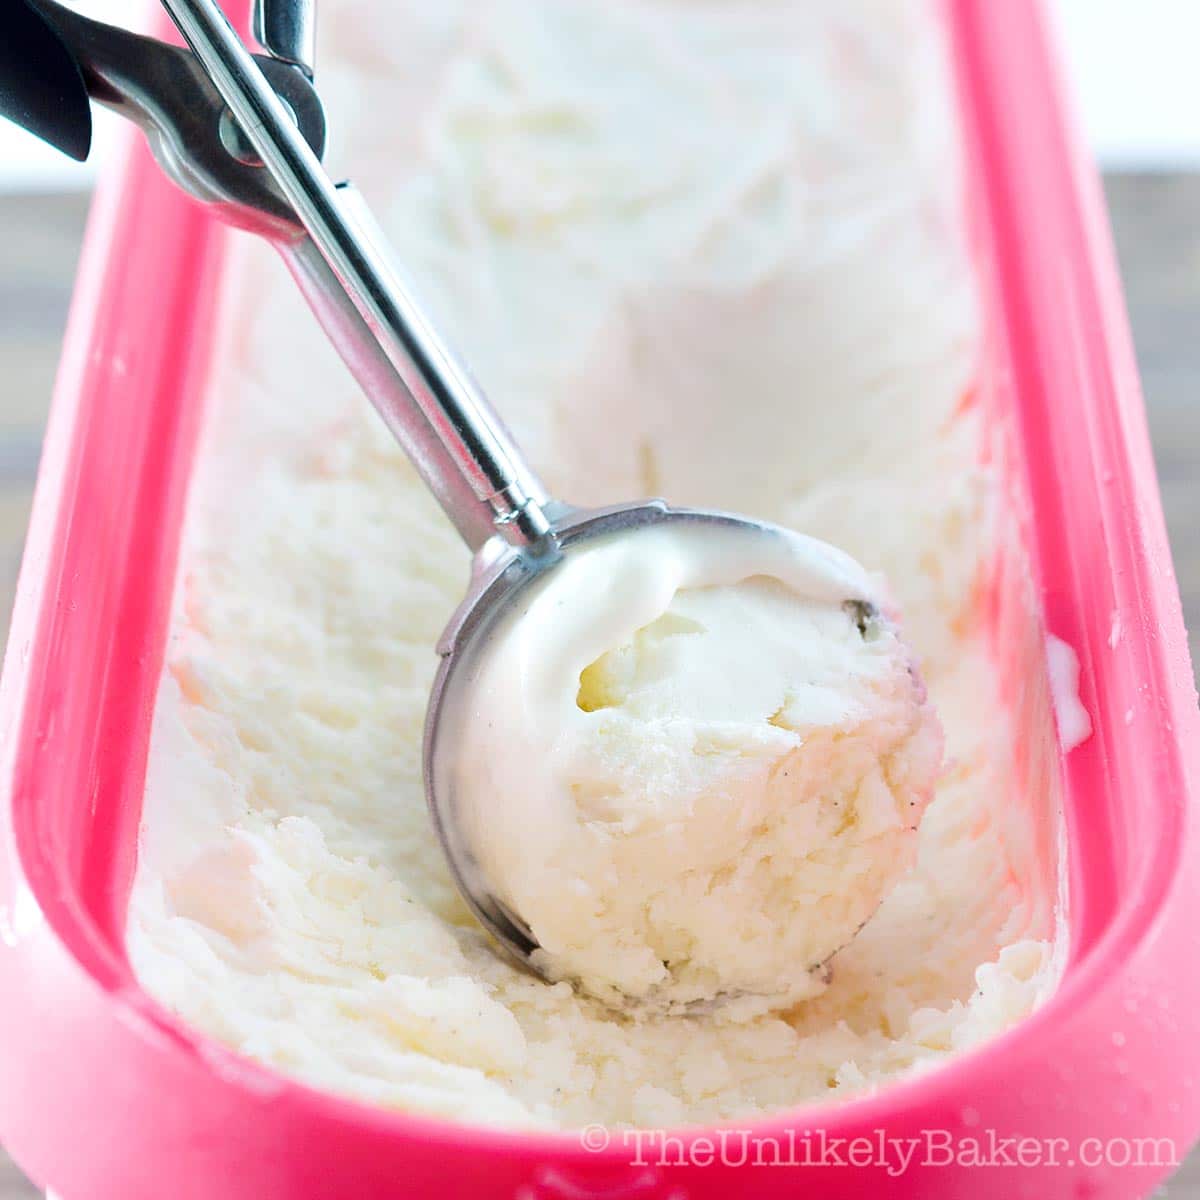 How to Make Ice Cream without an Ice Cream Maker